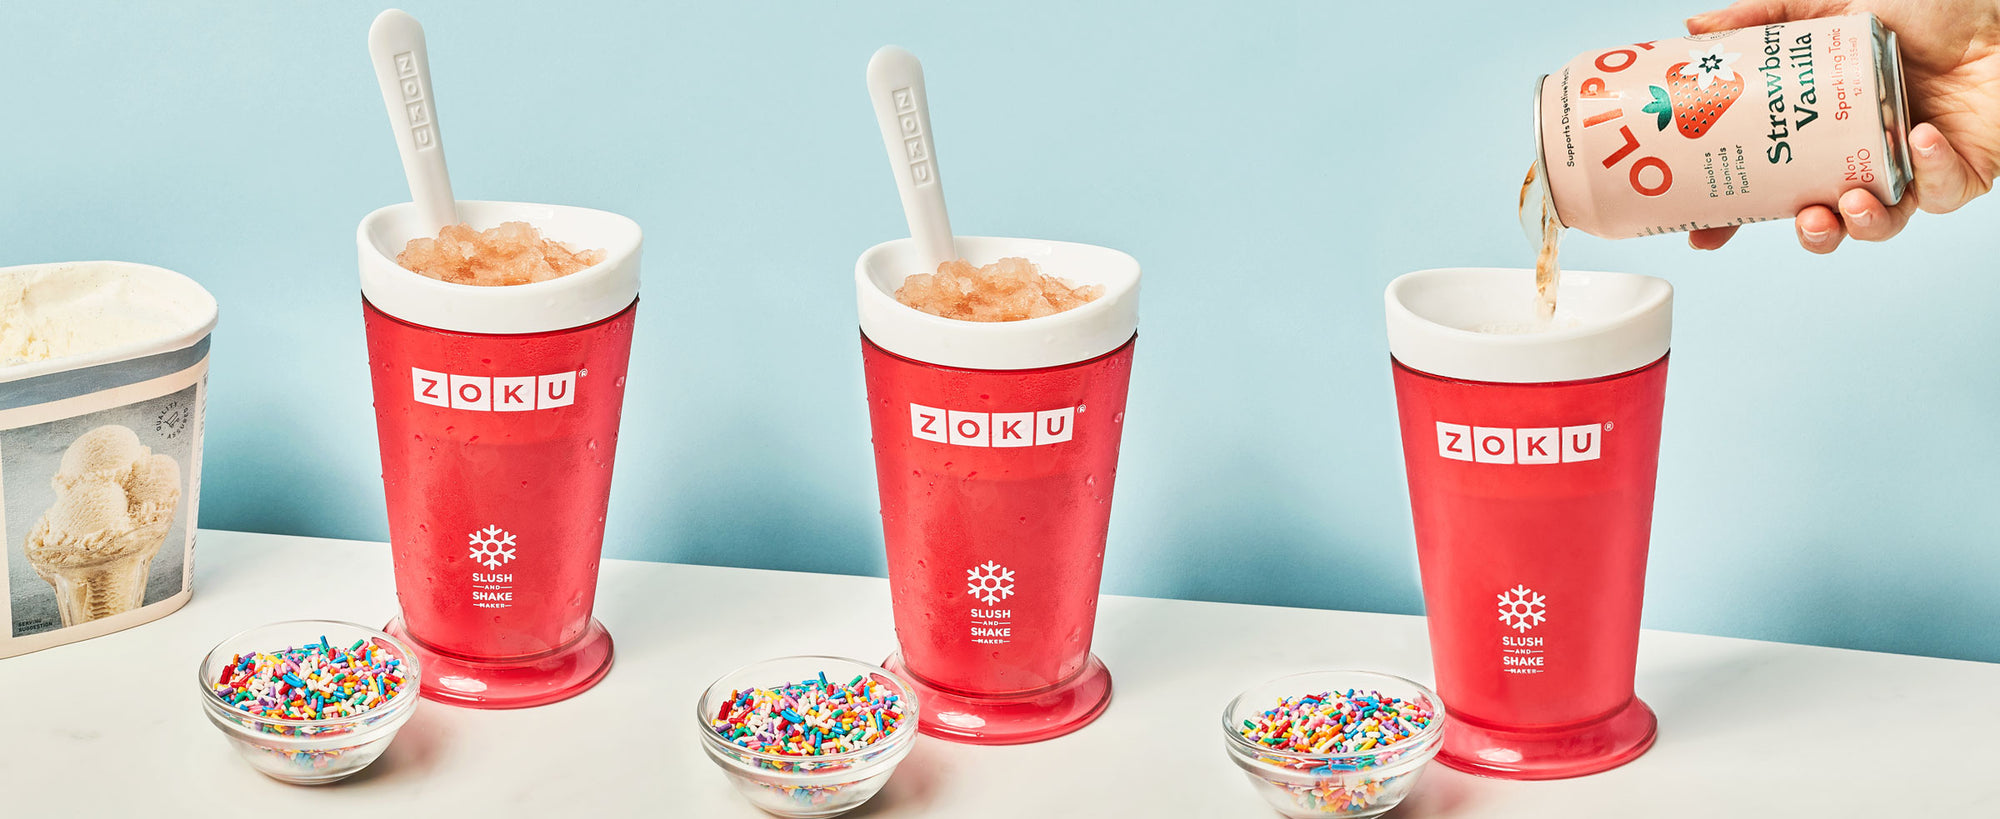 An image showing how to make a soda slushy featuring three ZOKU Slush & Shake Makers as a can of Olipop is being added to the rightmost slush maker.